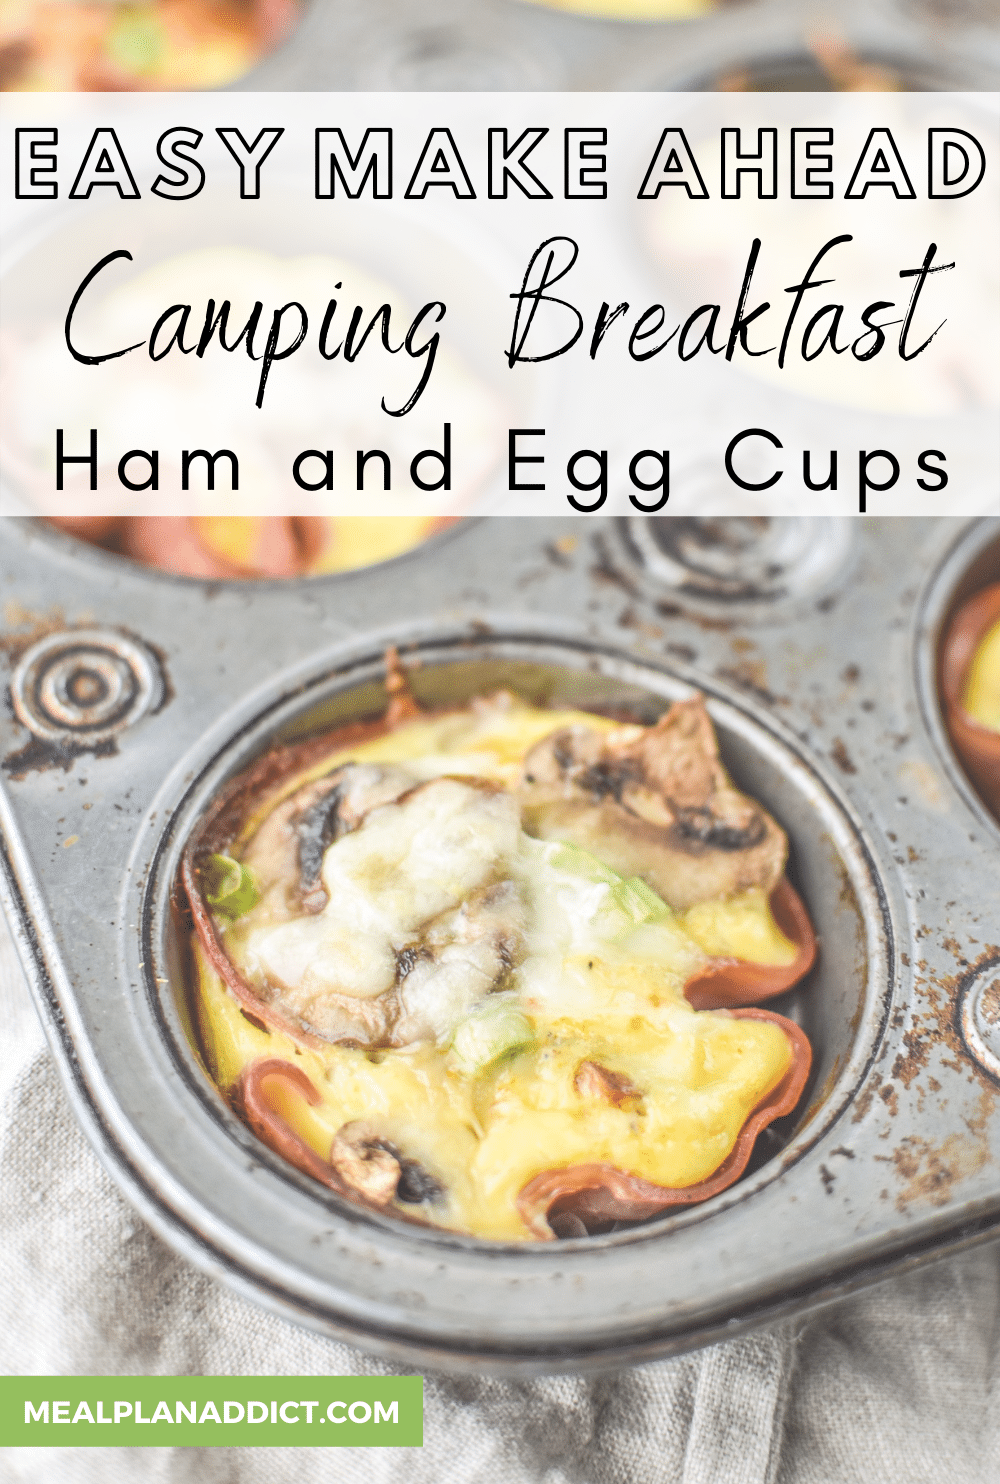 Easy Make Ahead Camping Breakfast Ham and Egg Cups